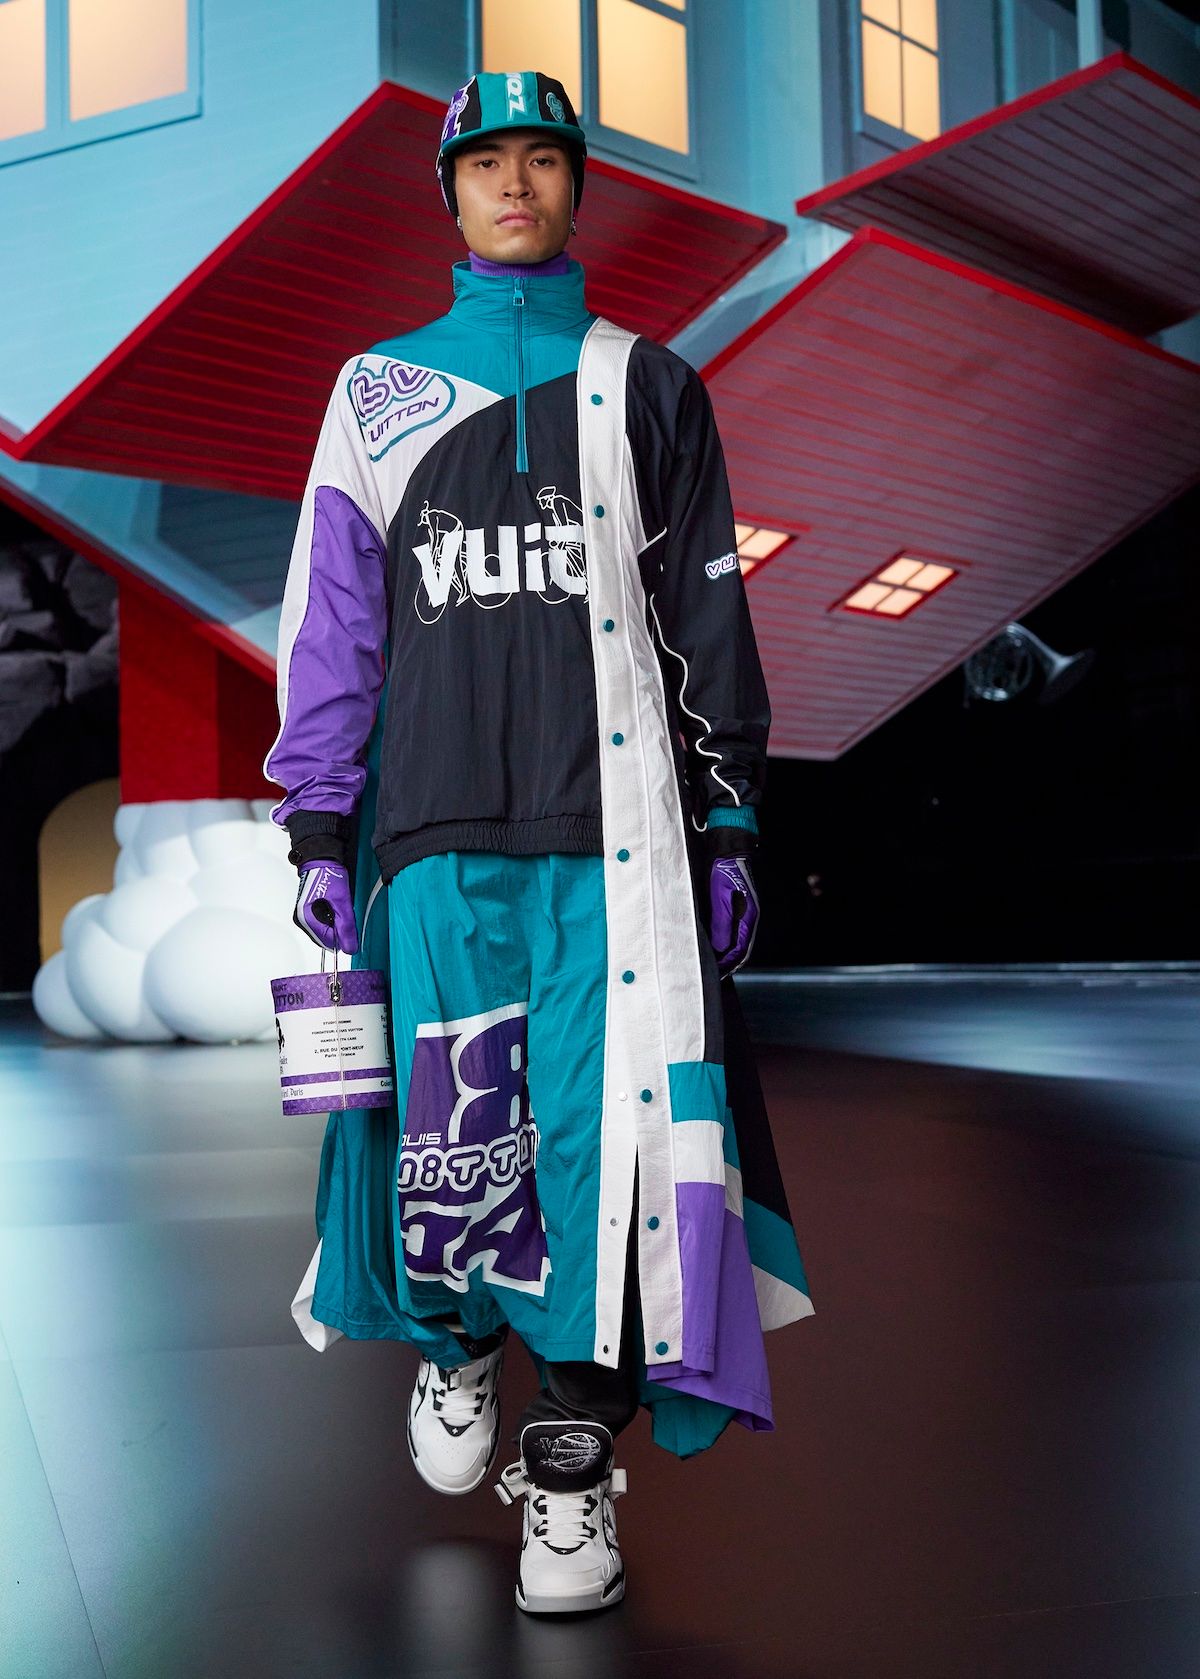 Spiked Punch: Inside Virgil Abloh's SS22 Louis Vuitton collection